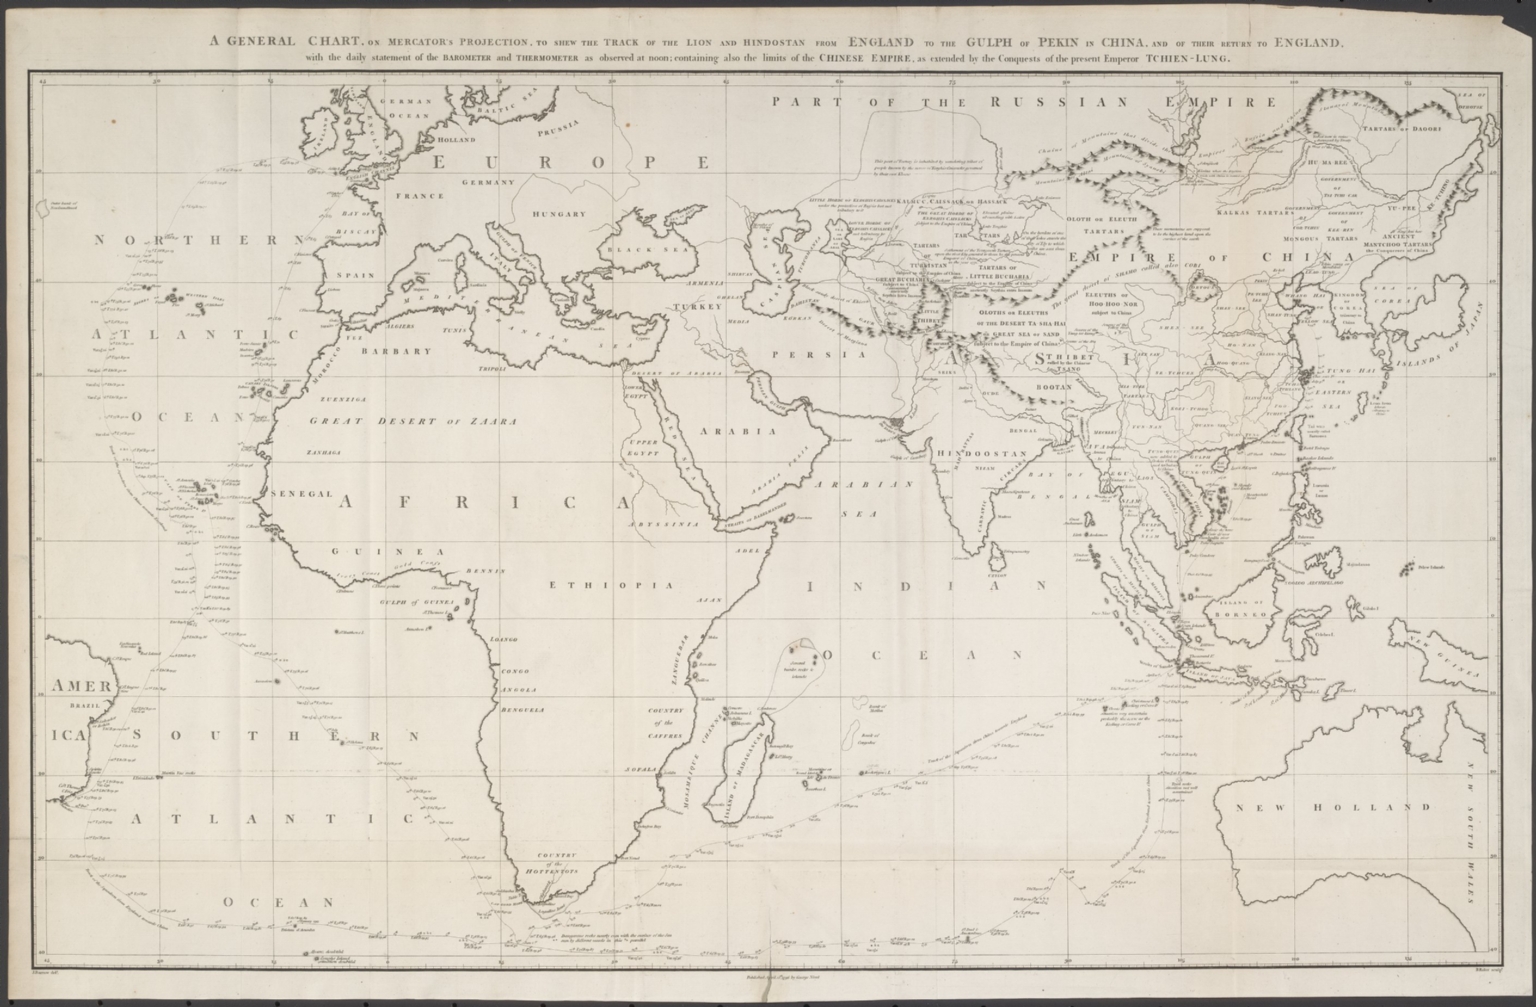 A general chart, on Mercator's projection, to shew the track of the Lion and Hindostan from England to the Gulph of Pekin in China, and of their return to England : with the daily statement of the barometer and thermometer as observed at noon: containing also the limits of the Chinese Empire as extended by the conquests of the present Emperor Tchien-Lung